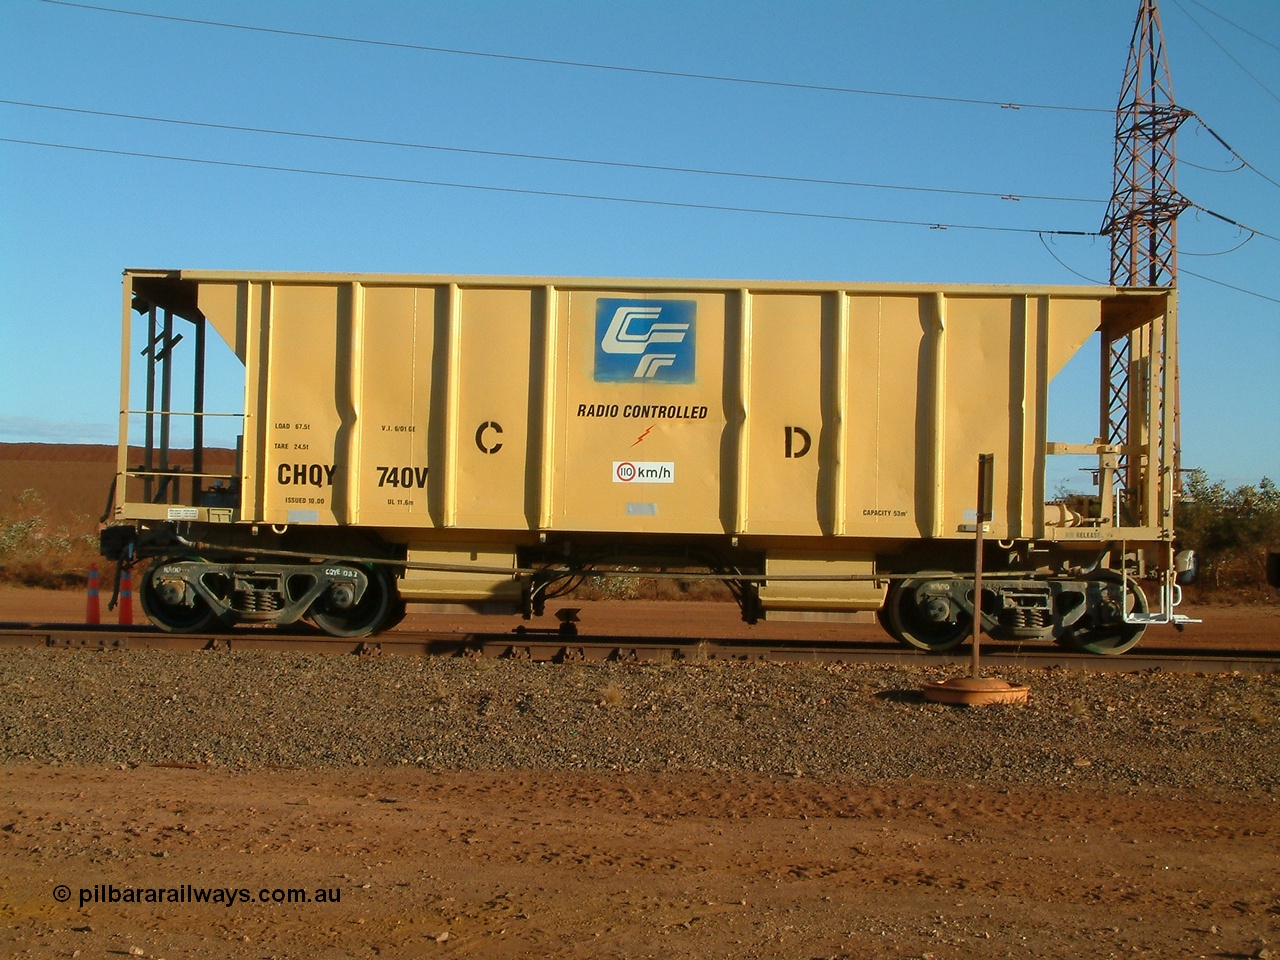 040815 164711
Nelson Point, CFCLA ballast waggon CHQY type 740 just being delivered to BHP Iron Ore as part of the Rail PACE project, side view.
Keywords: CHQY-type;CHQY740;CFCLA;CRDX-type;BHP-ballast-waggon;